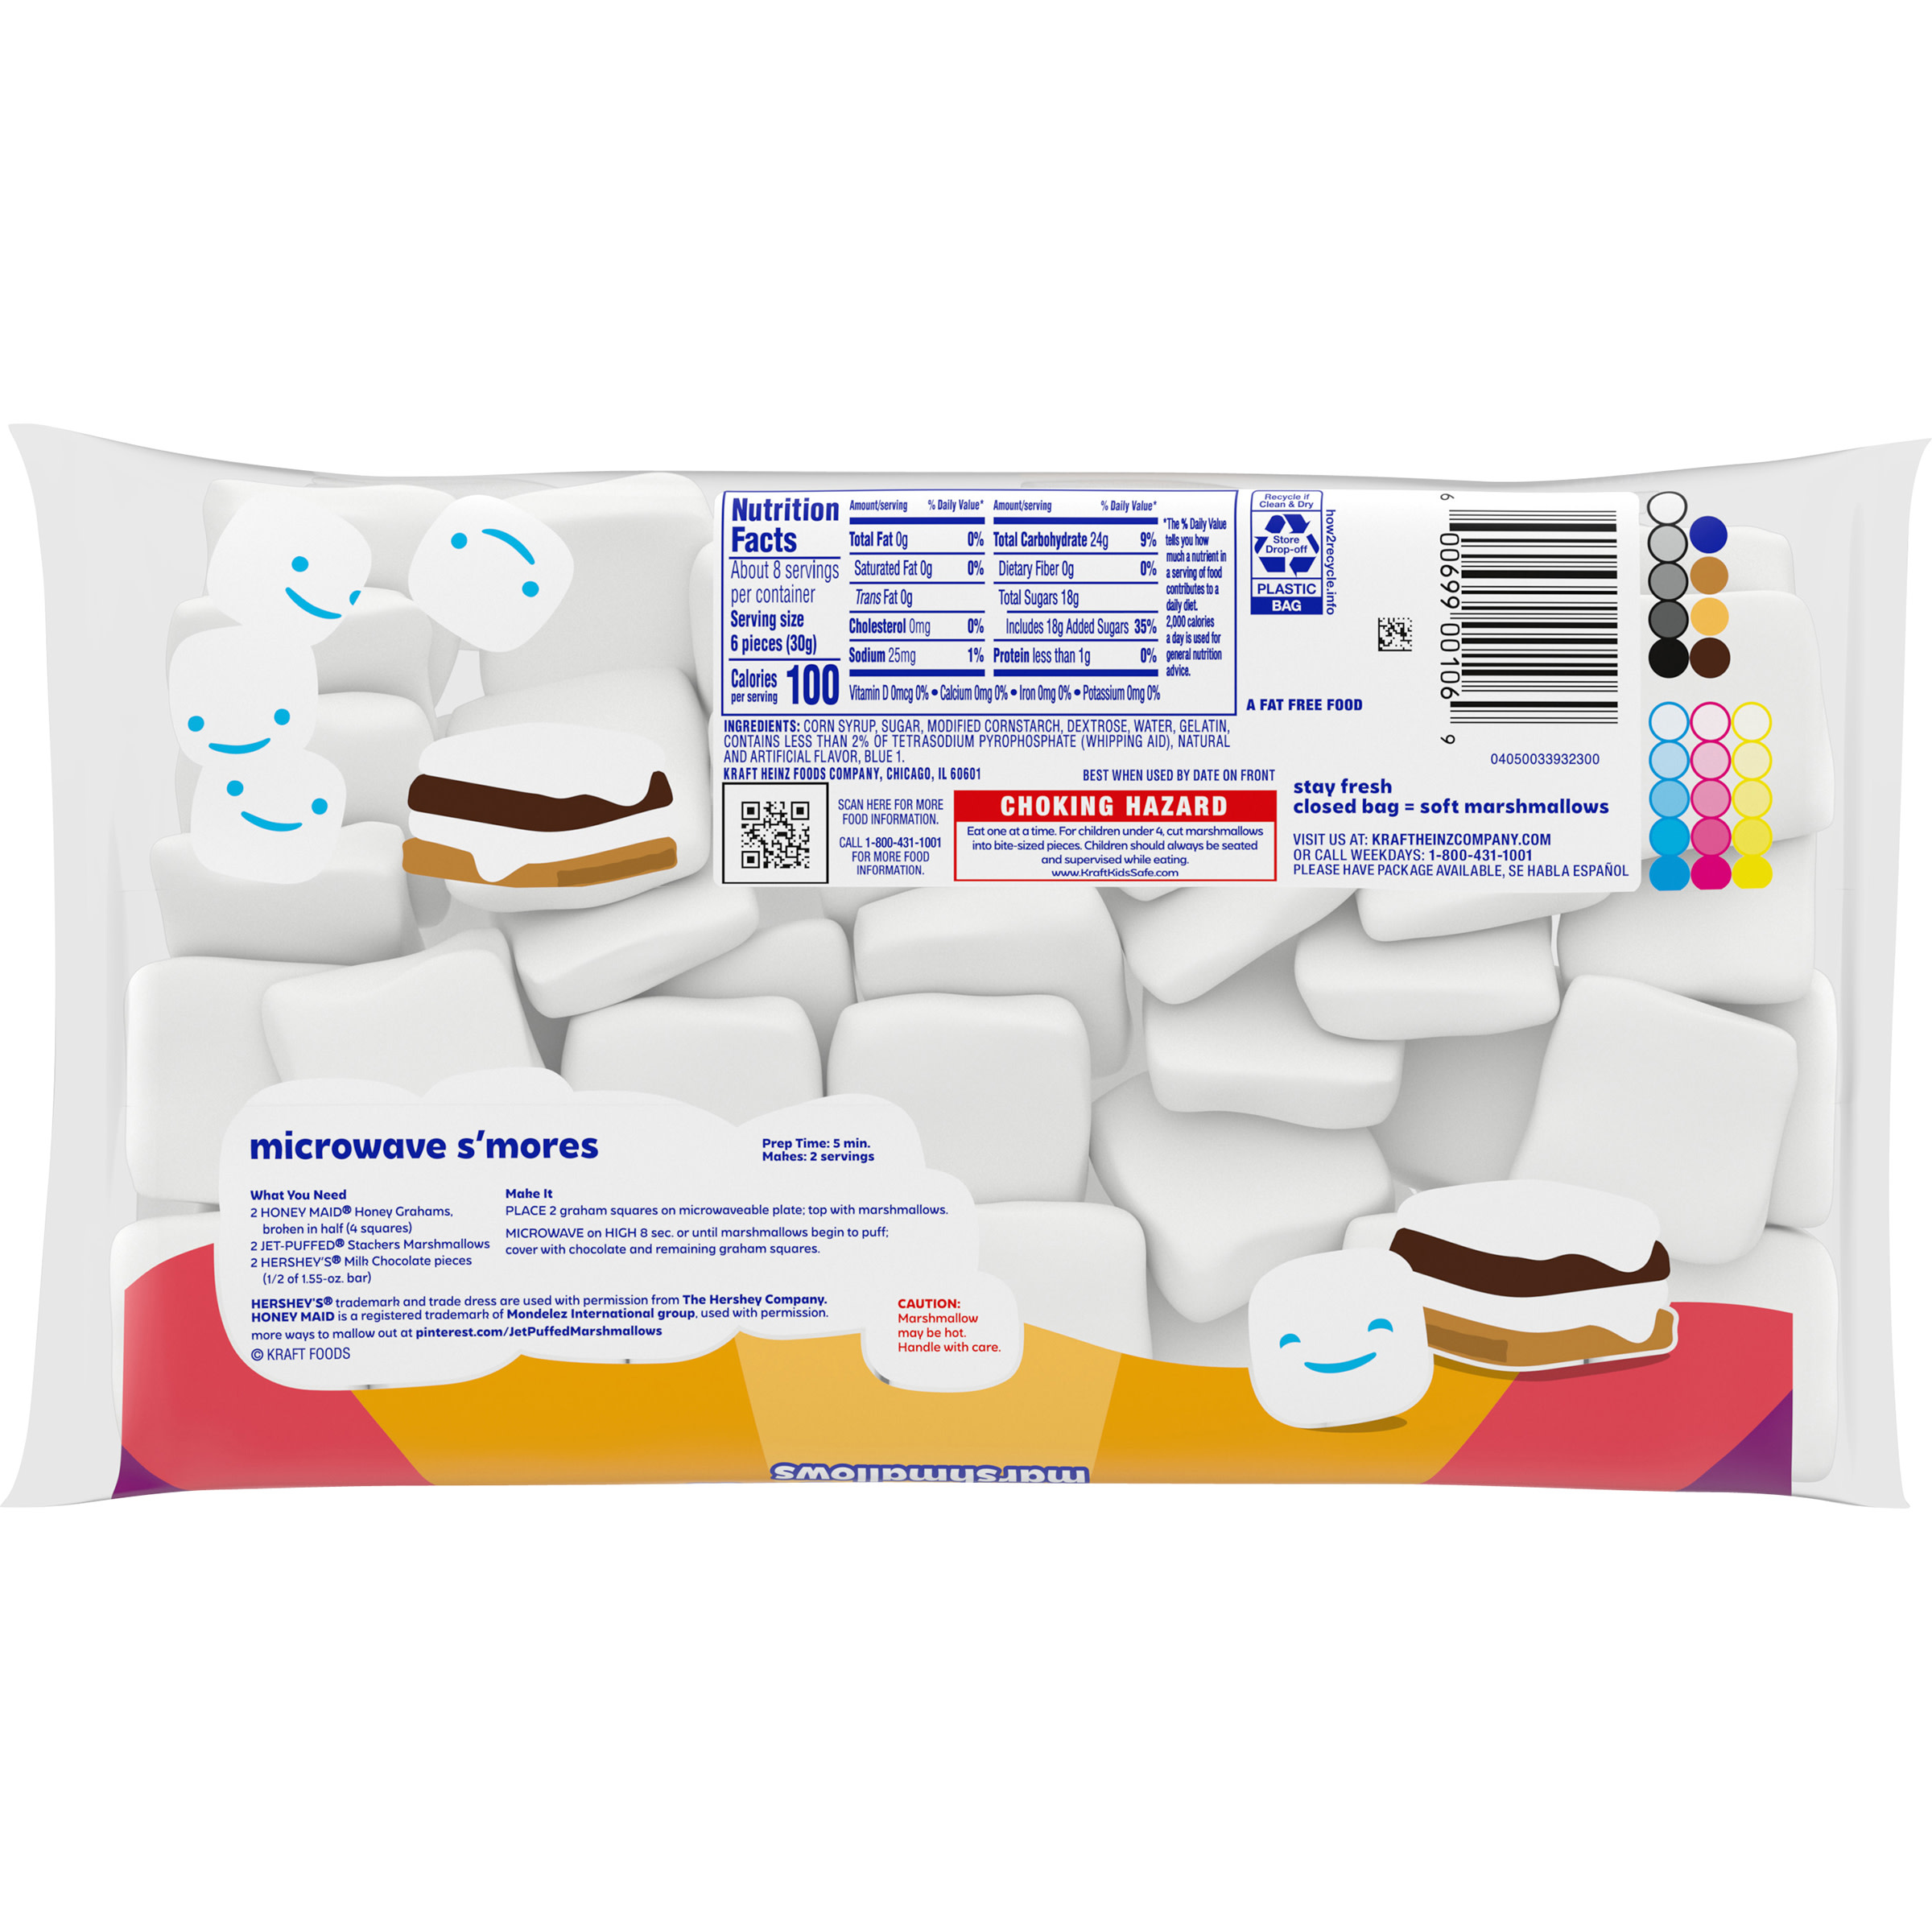 Jet-Puffed Stackers Marshmallows, 8 oz. Bag - image 10 of 16